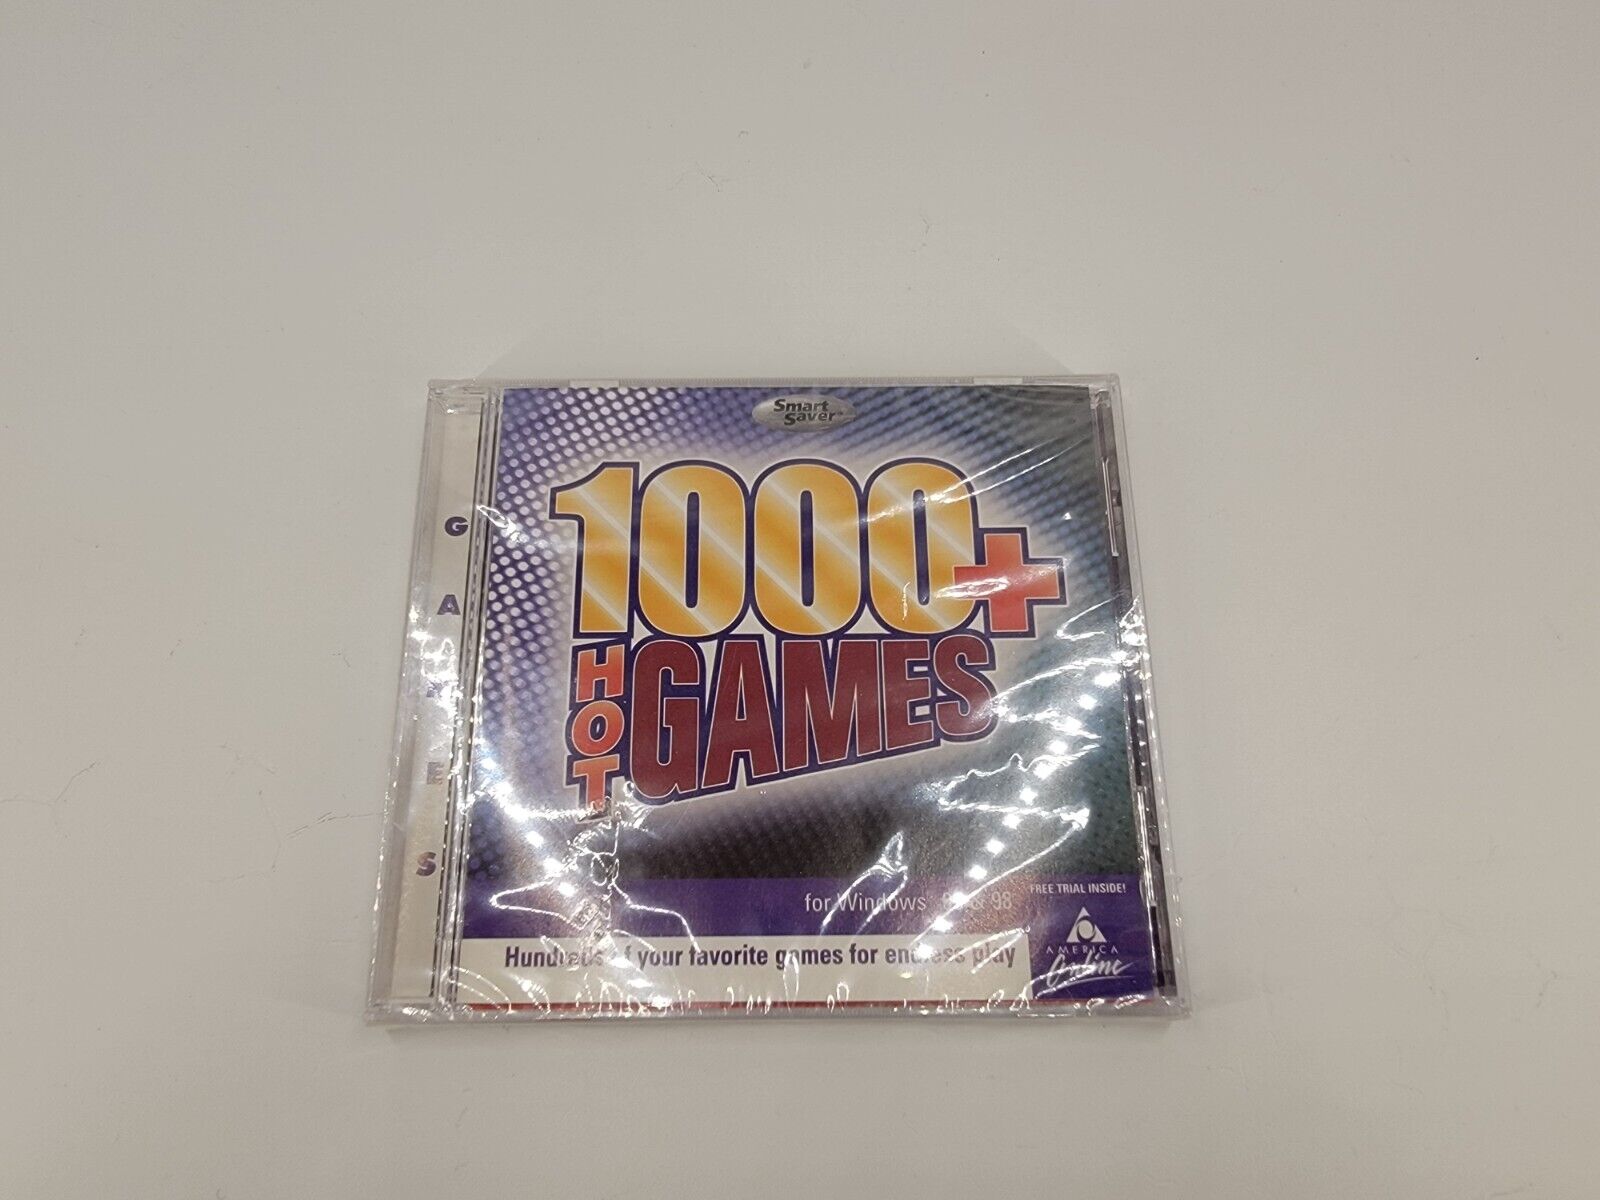 NEW & SEALED Retro PC Game 1000 + Hot Games For Windows 95 & 98